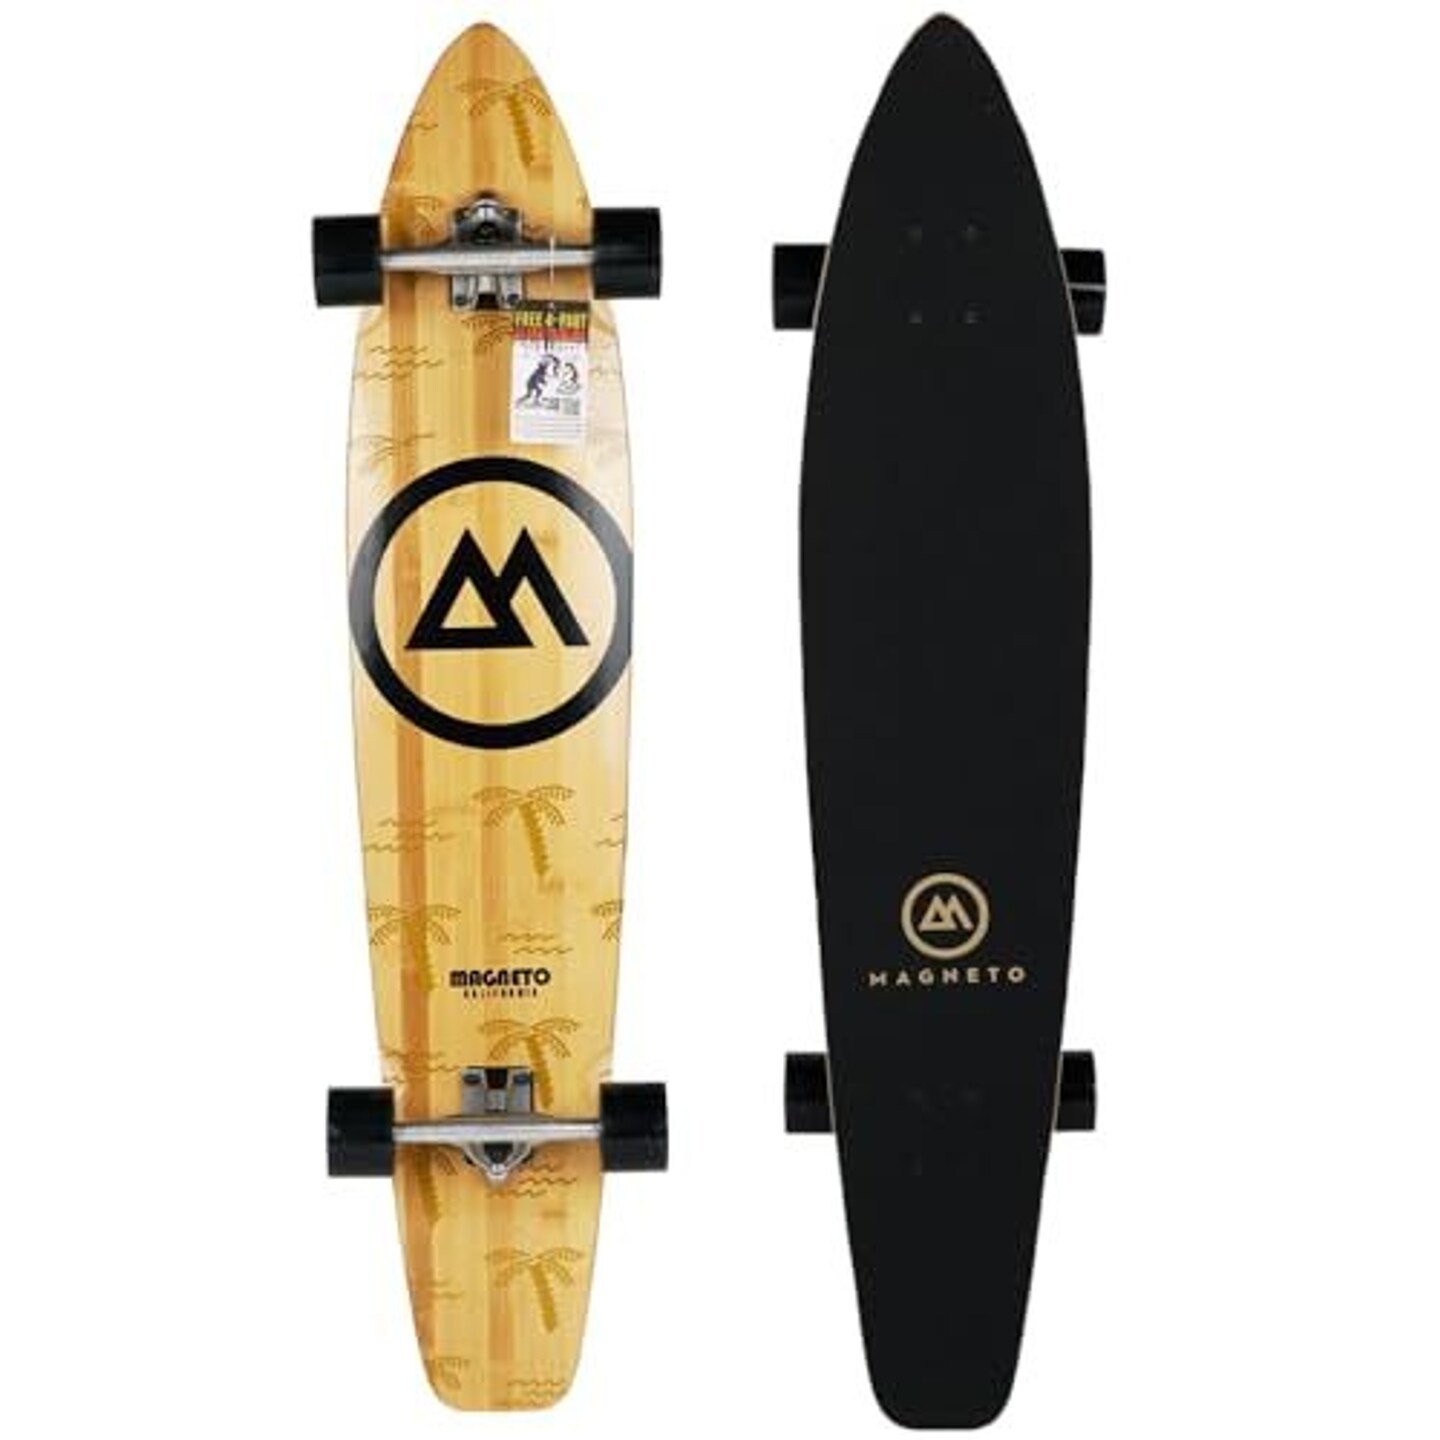 Magneto 44 inch Kicktail Cruiser Longboard Skateboard | Bamboo and Hard Maple Deck | Made for Adults, Teens, and Kids (Palm Flats)